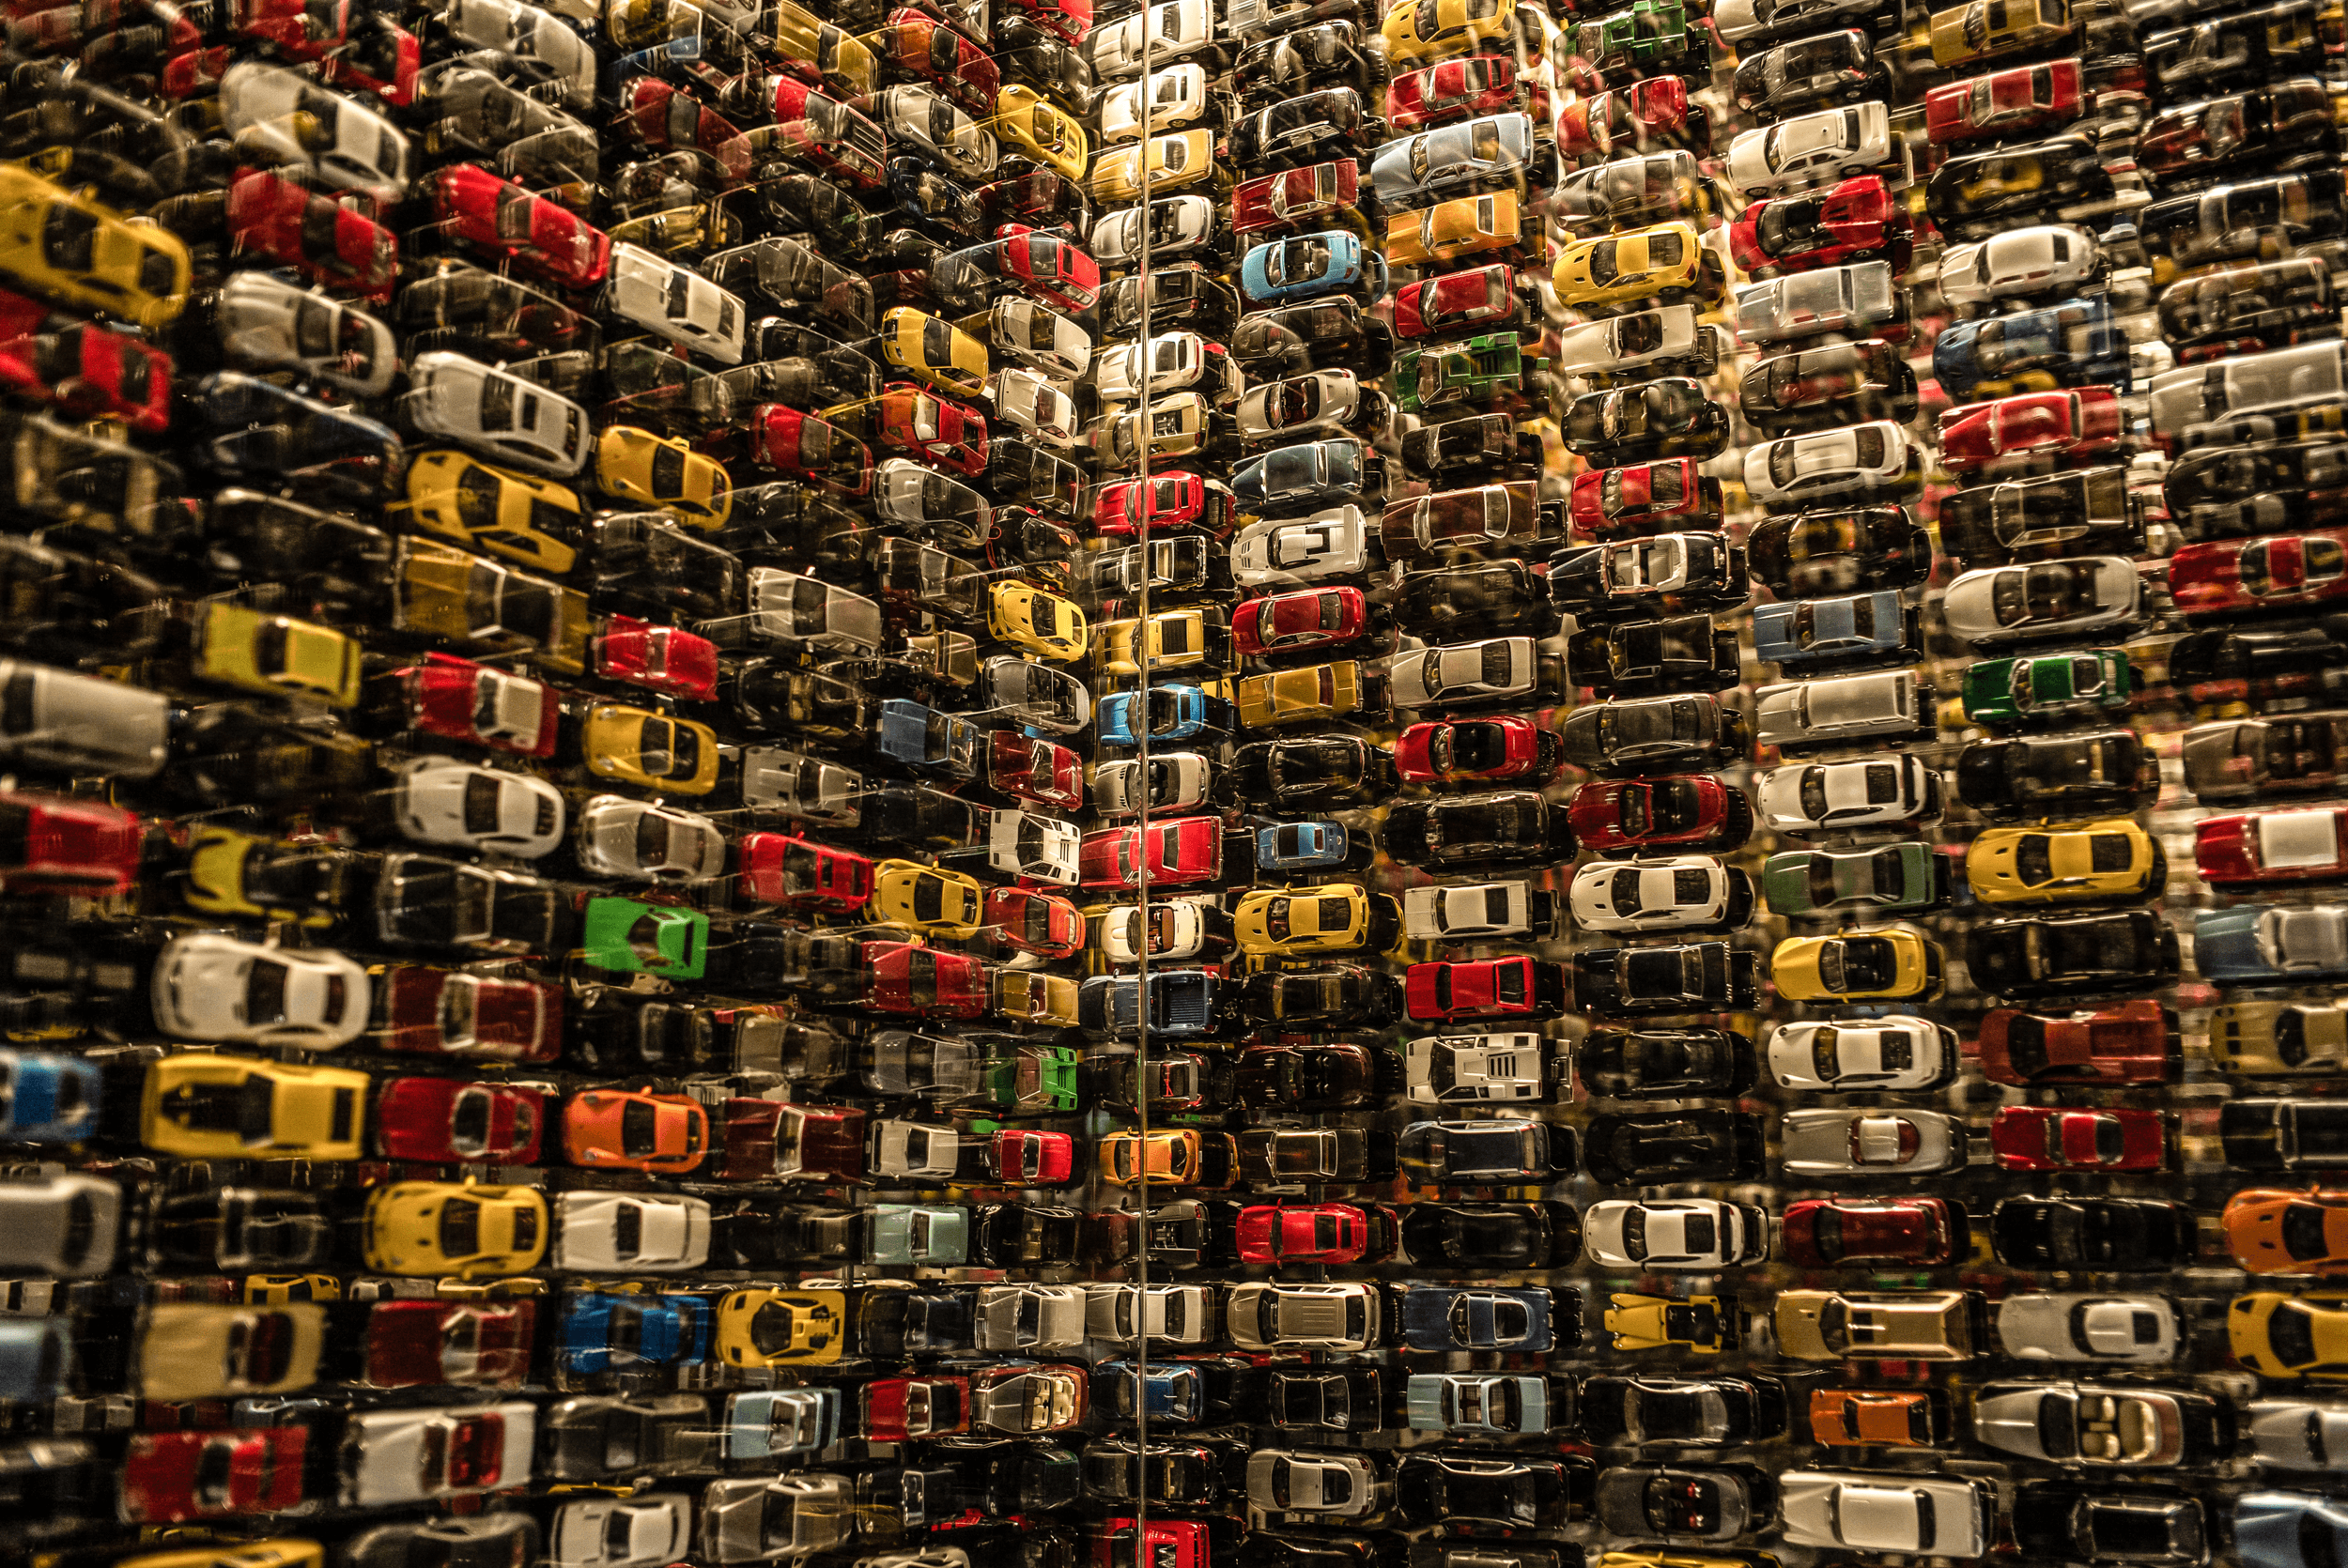 TOY CARS